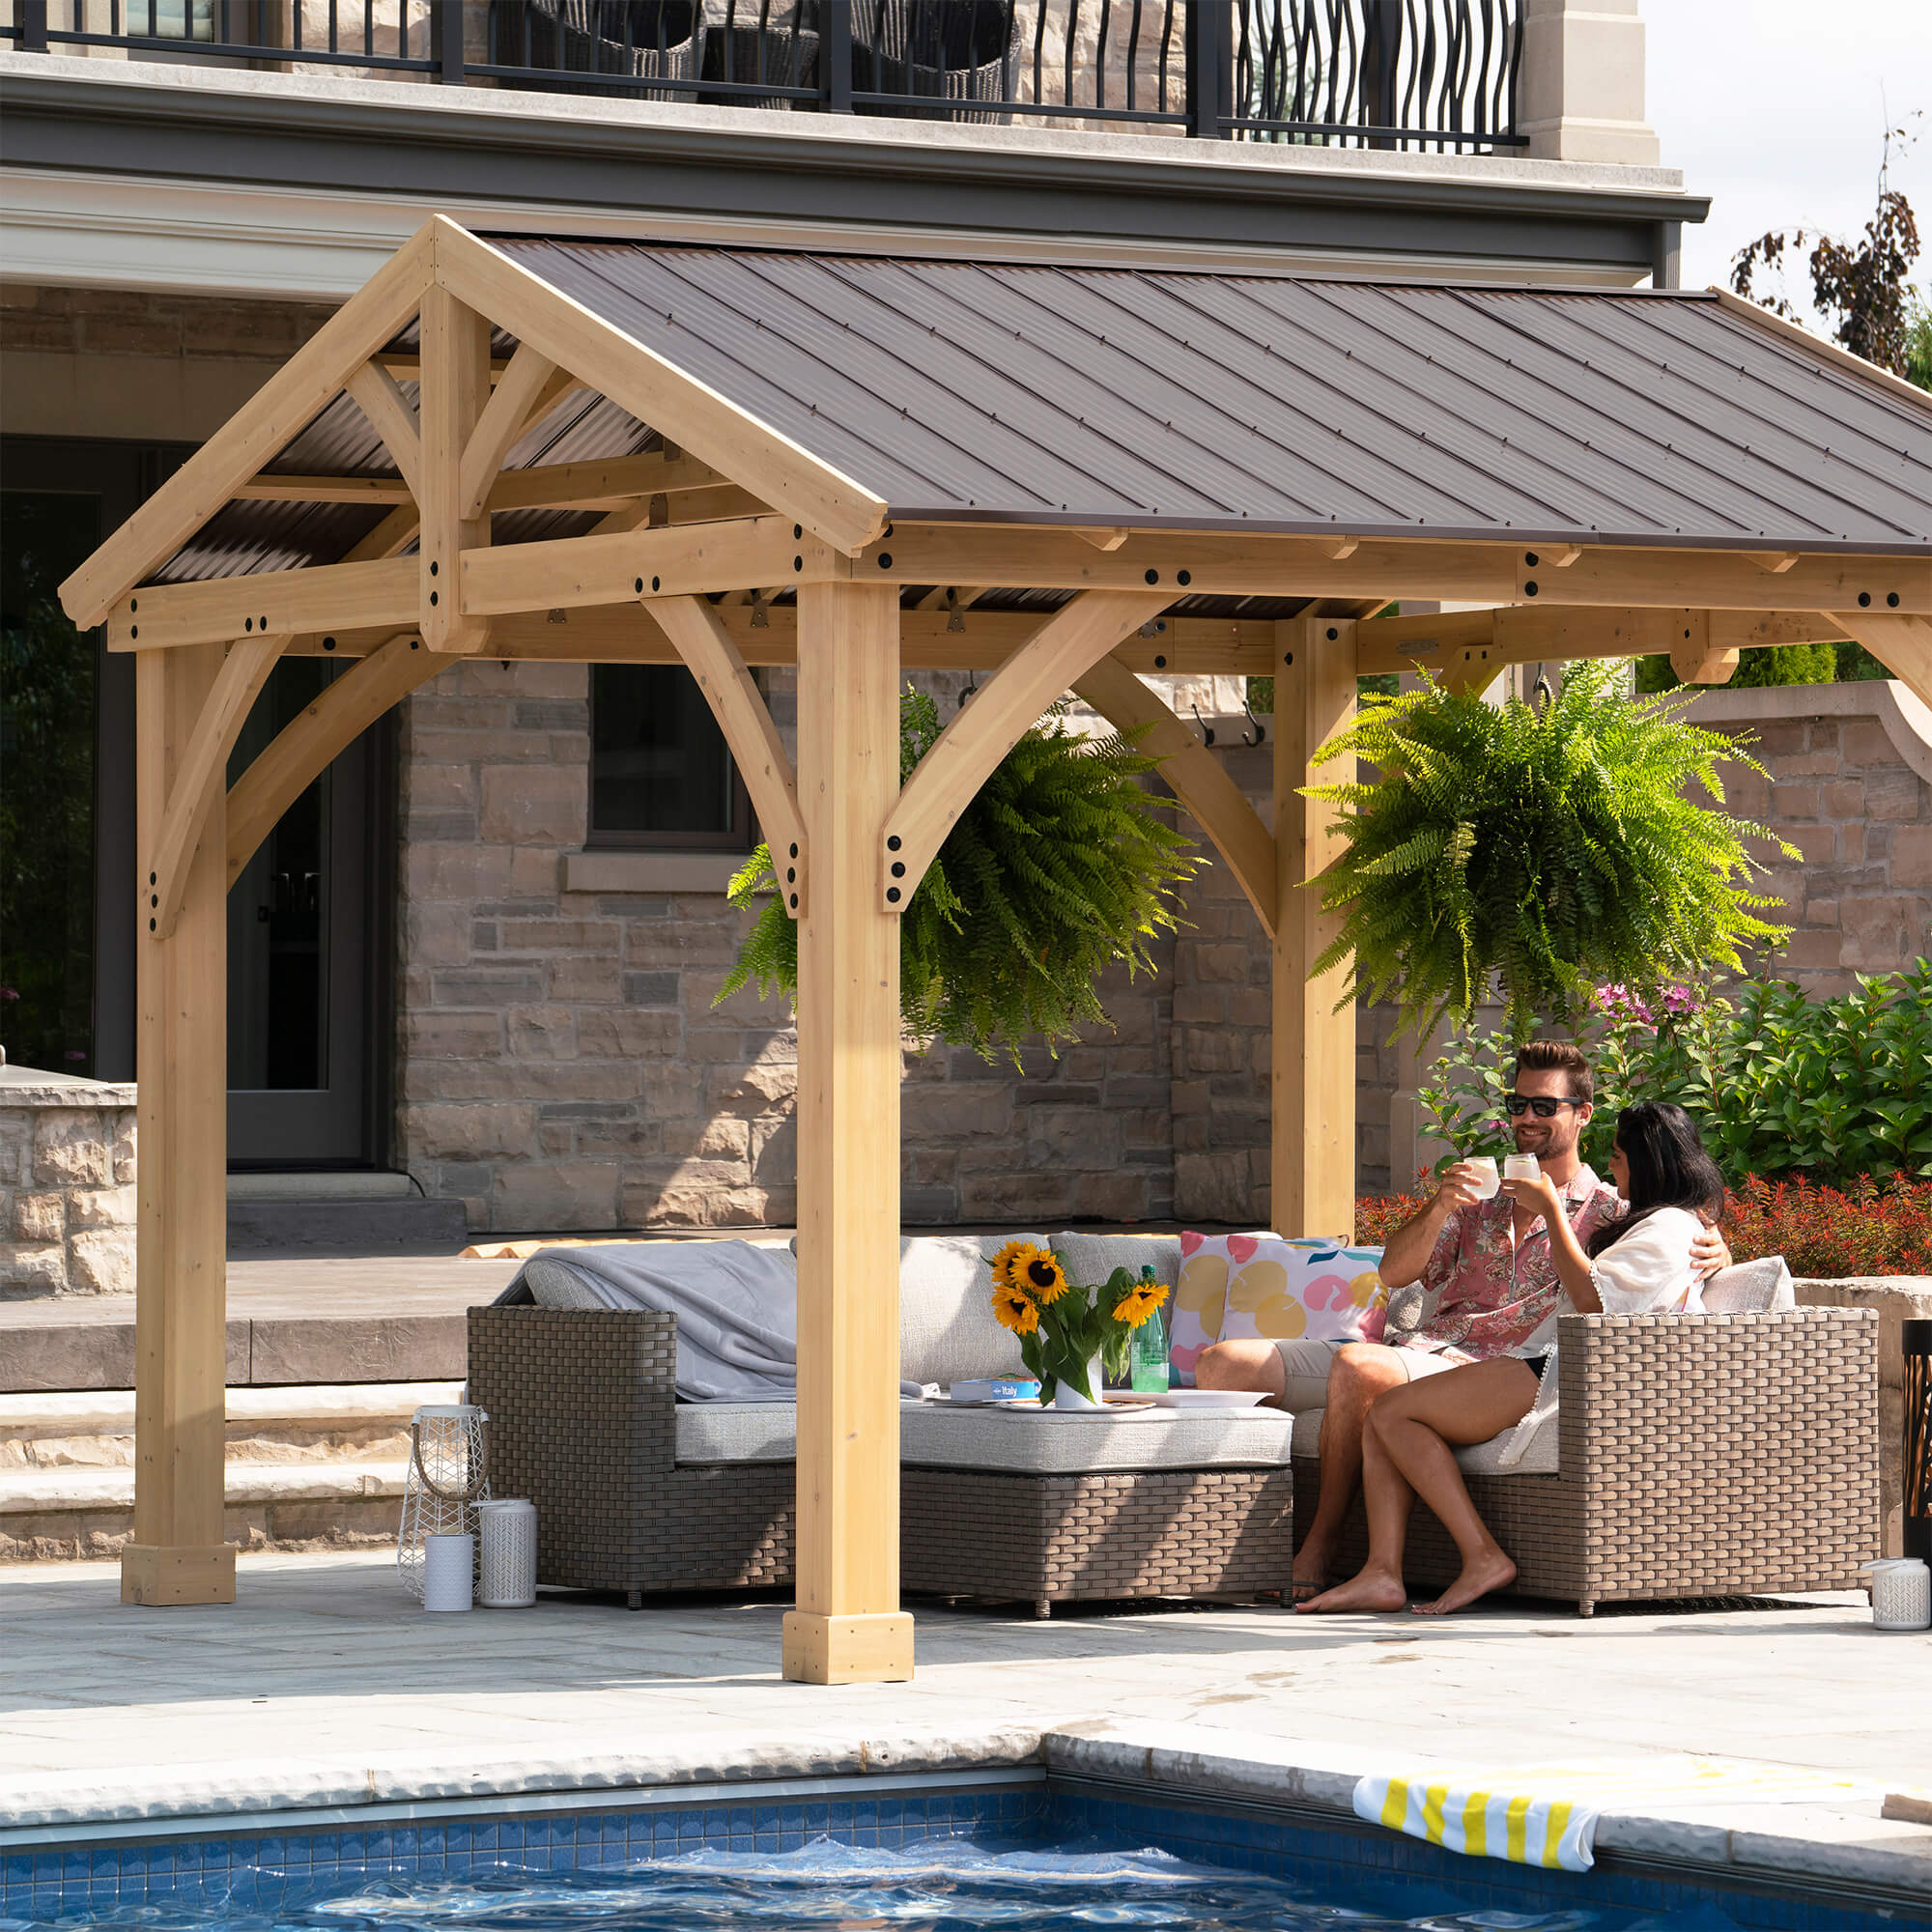 Stylish shelter provided by the Yardistry Carolina Cedar 11 x 13 Pavilion with Aluminum Roof, perfect for enhancing a poolside leisure area.